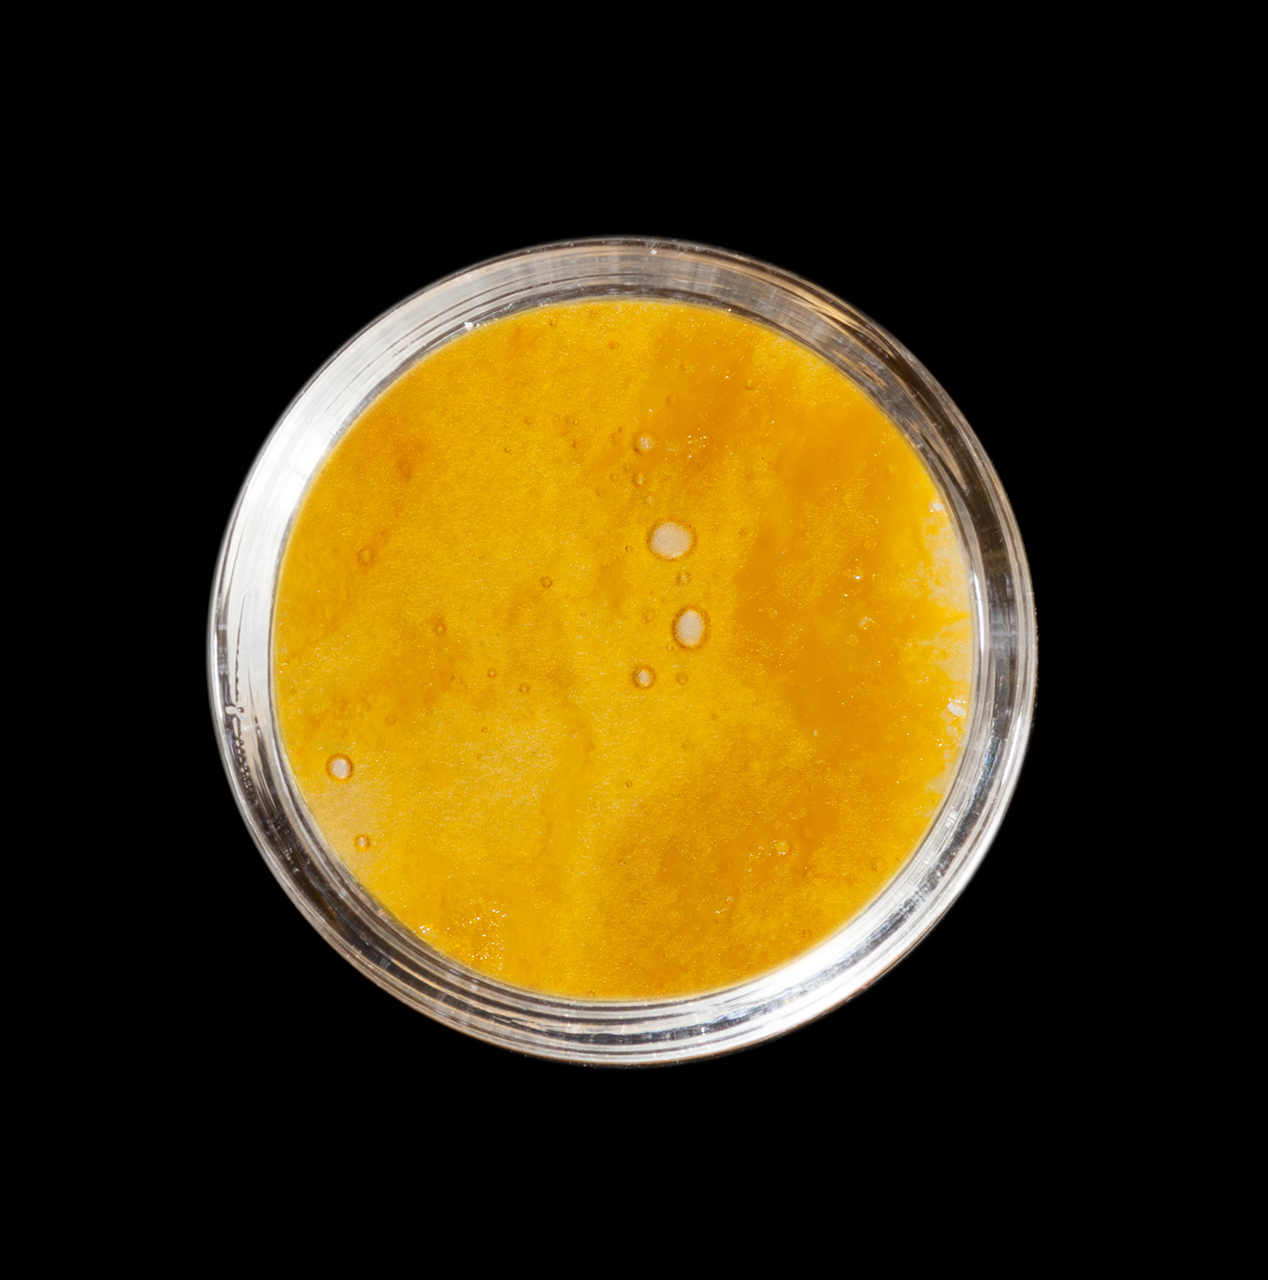 2016 Michigan Medical Cannabis Cup, Top 10 Hybrid Concentrates